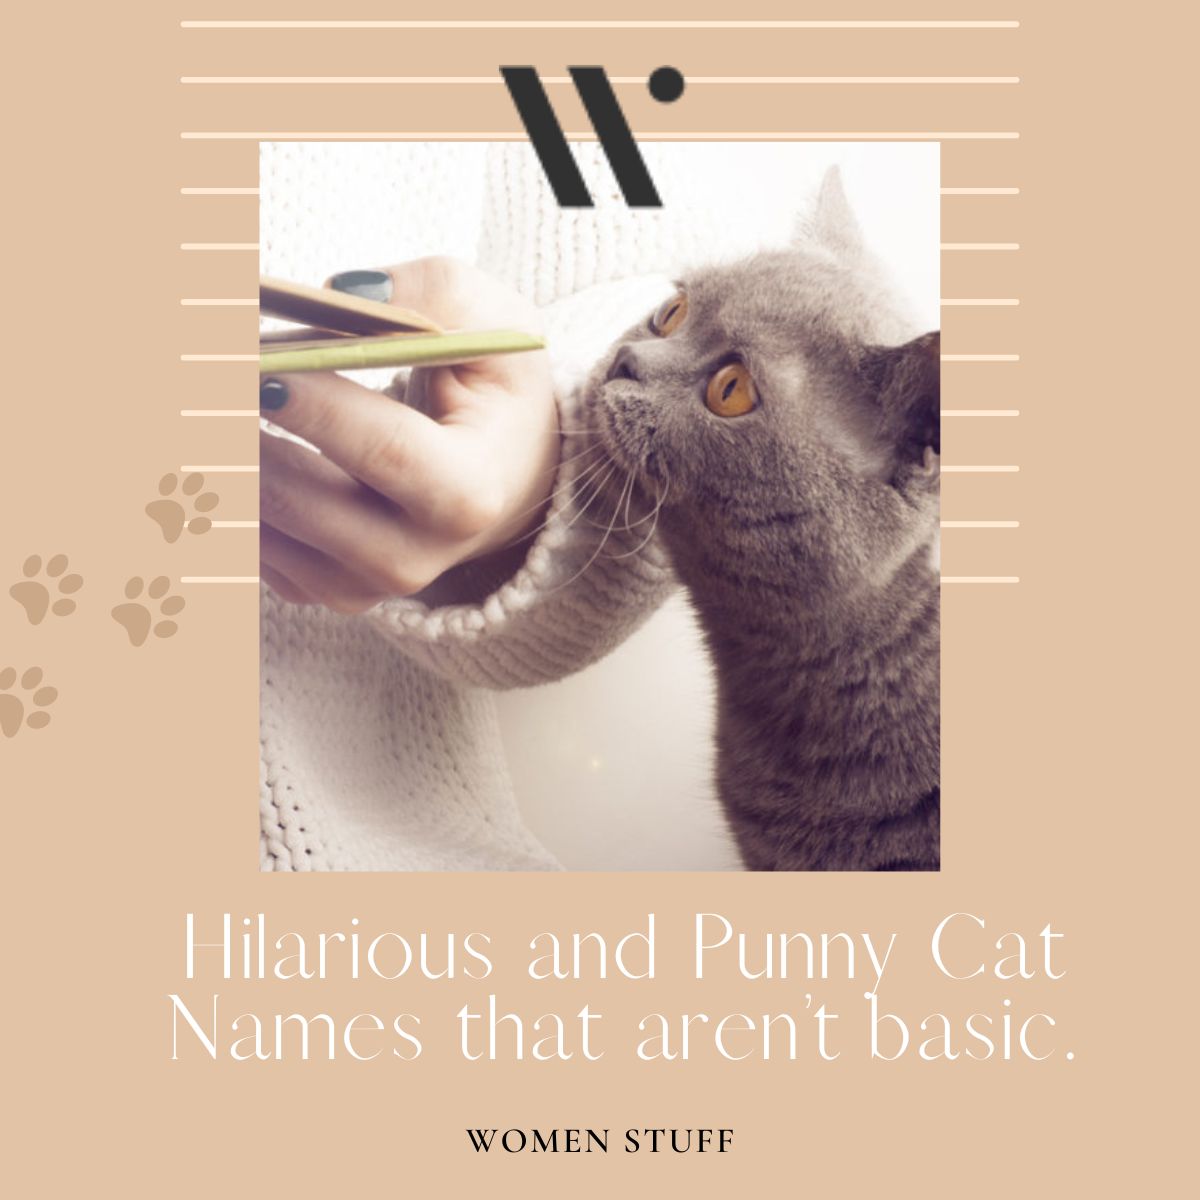 Hilarious and Punny Cat Names that aren’t basic Banner Image